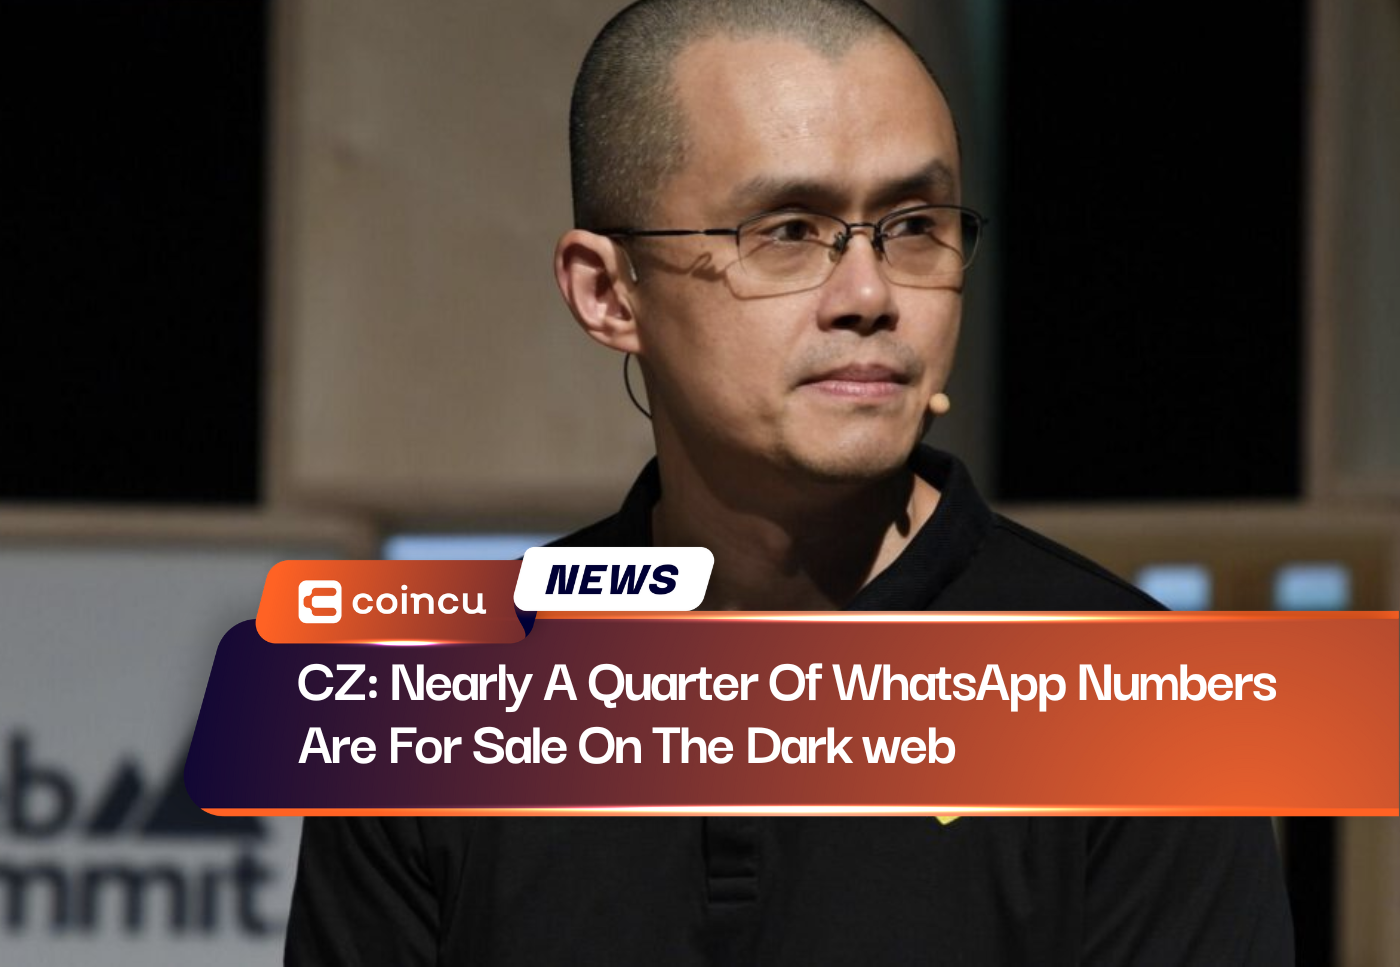 CZ: Nearly A Quarter Of WhatsApp Numbers Are For Sale On The Dark web